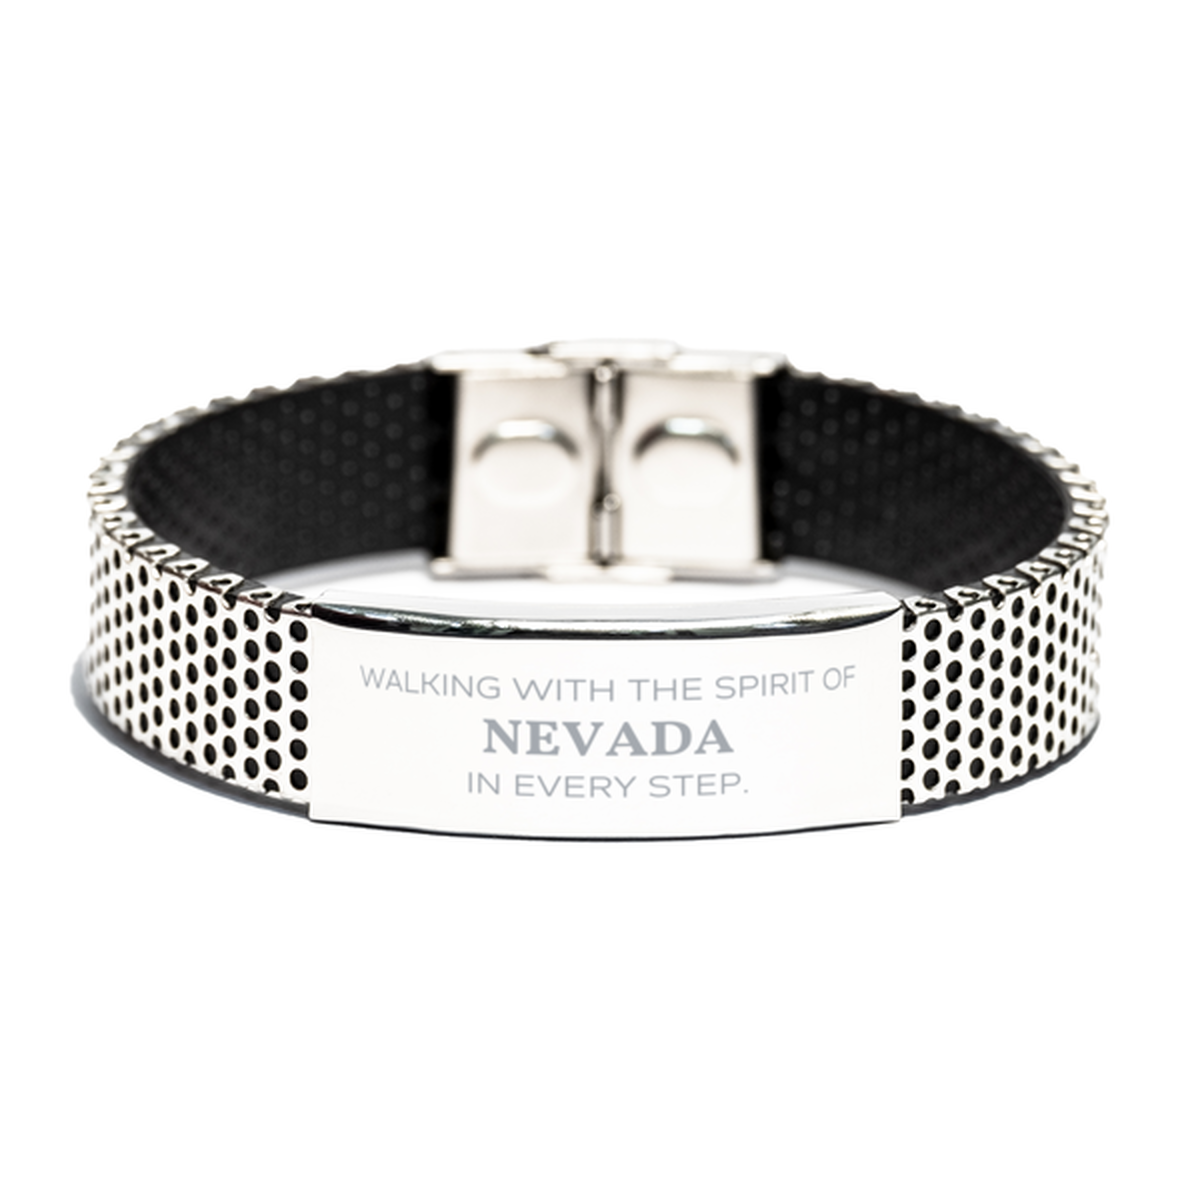 Nevada Gifts, Walking with the spirit, Love Nevada Birthday Christmas Stainless Steel Bracelet For Nevada People, Men, Women, Friends